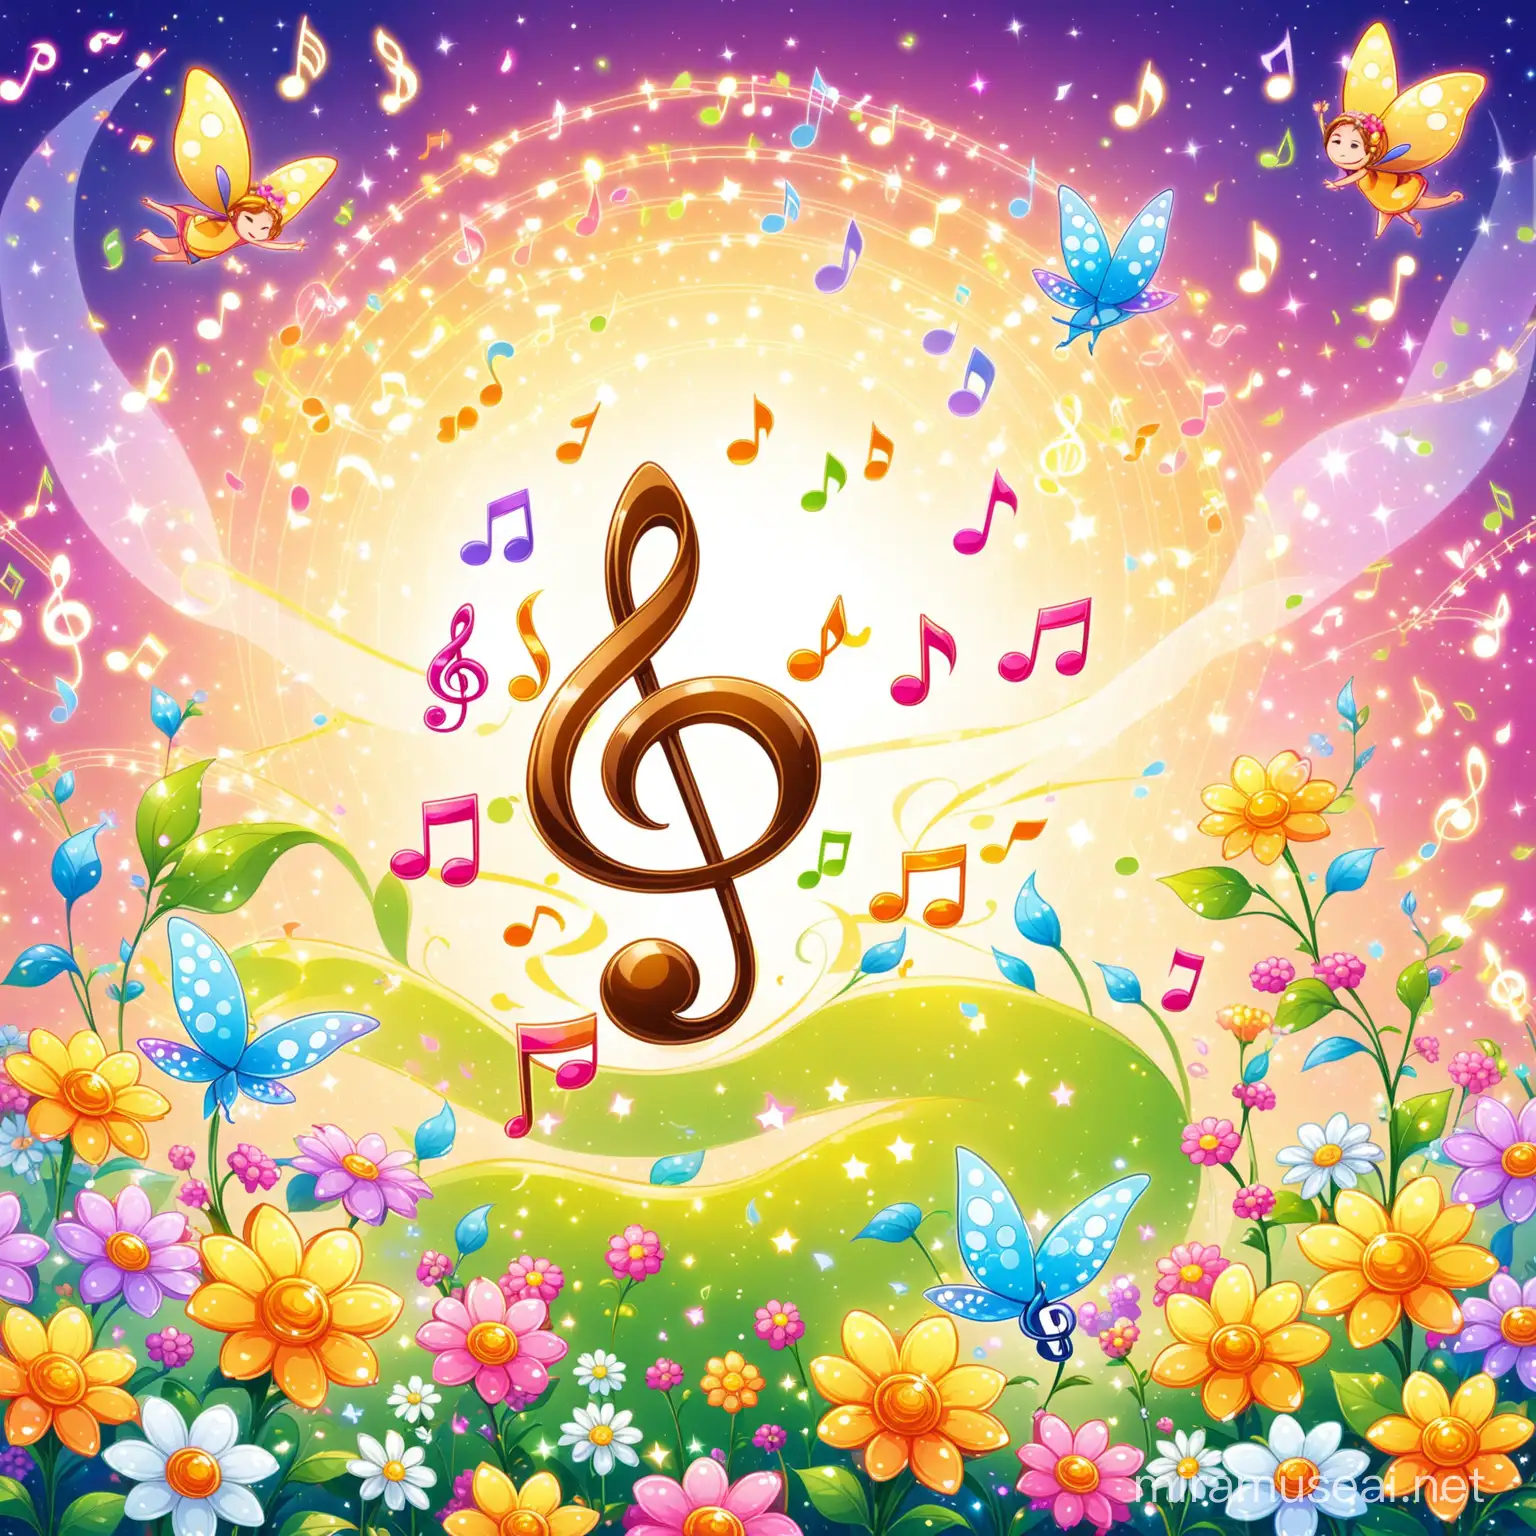 Cartoon music stave with fancy clef and notes on it. On the top - small fanny cartoon flowers with eyes and smiles and small flying fairies. Background is white 